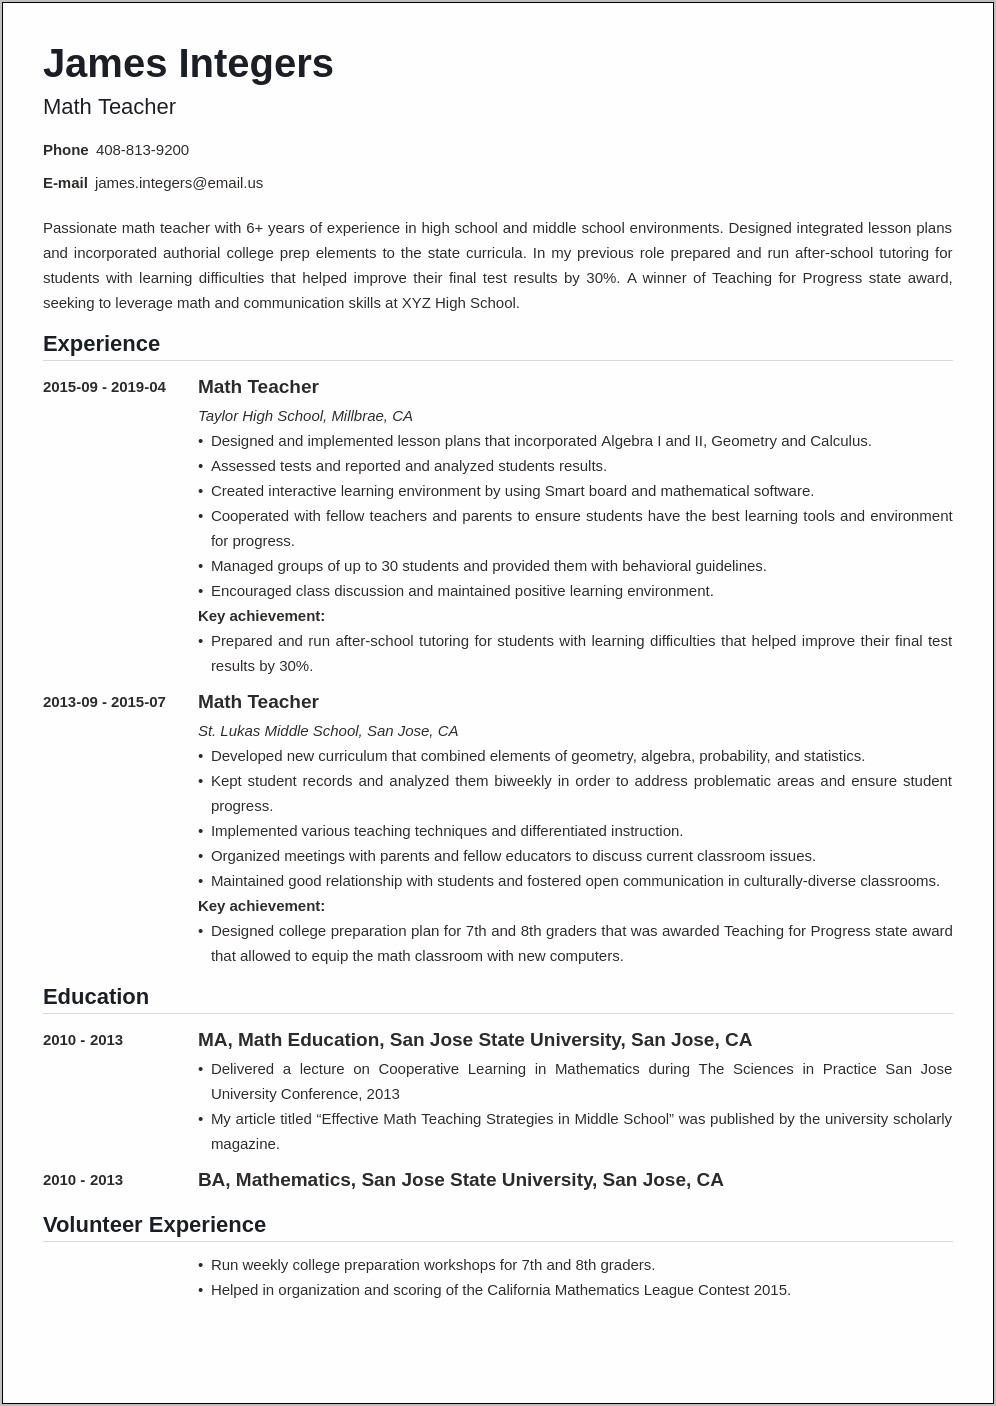 Sample Resume For Teachers In The Philippines